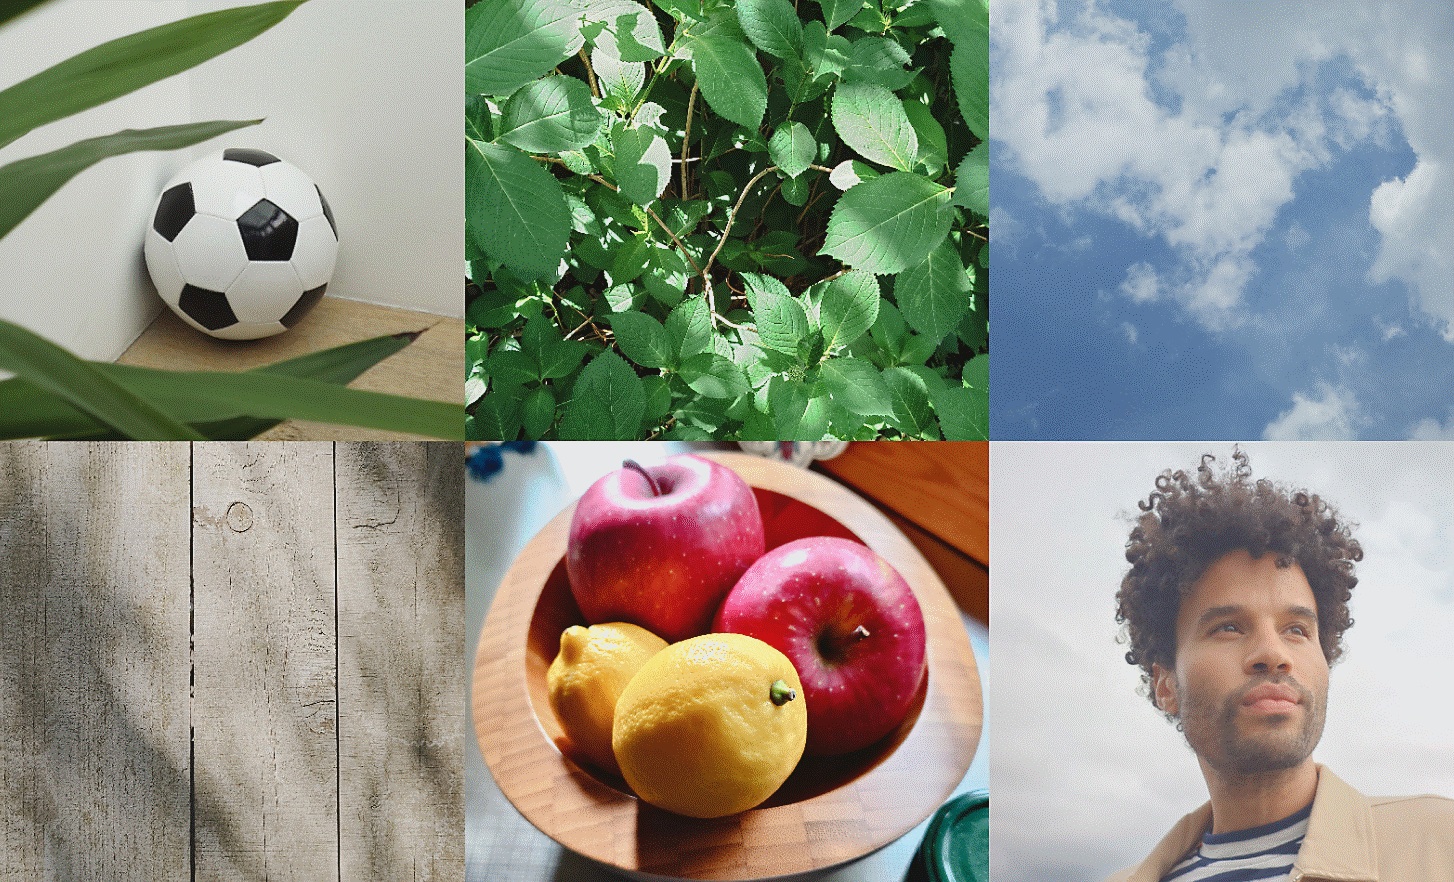 Six way split image showing a football, some plants, the sky, some wooden planks, a bowl of fruit, and a person 